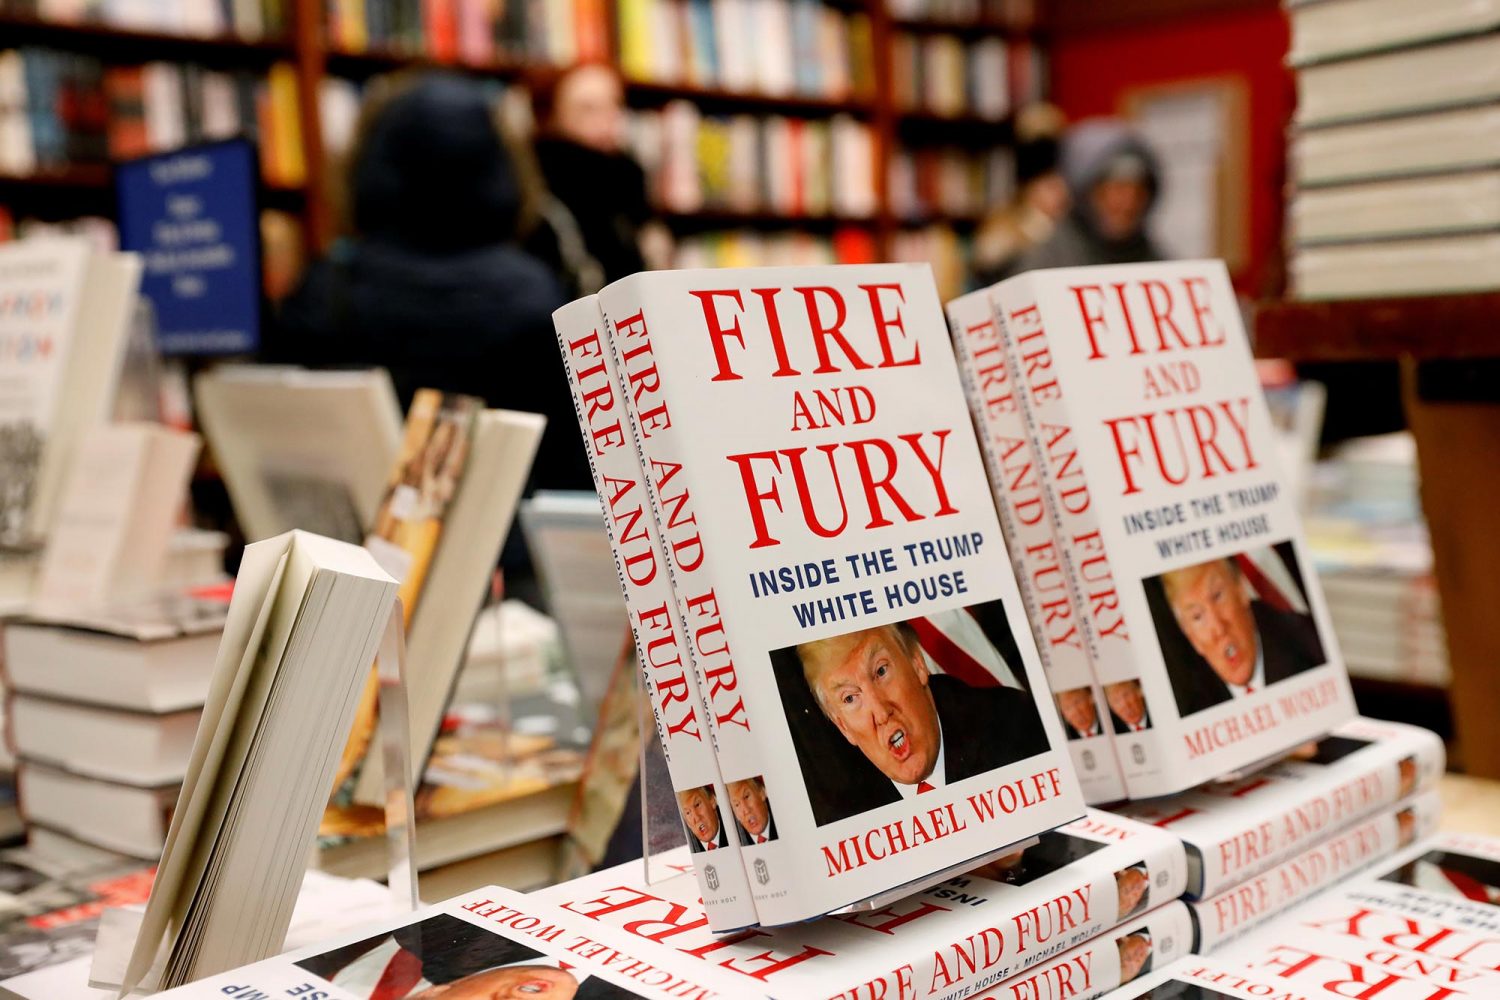 Copies of the book “Fire and Fury: Inside the Trump White House” by author Michael Wolff are seen at the Book Culture book store in New York, U.S. January 5, 2018. REUTERS/Shannon Stapleton